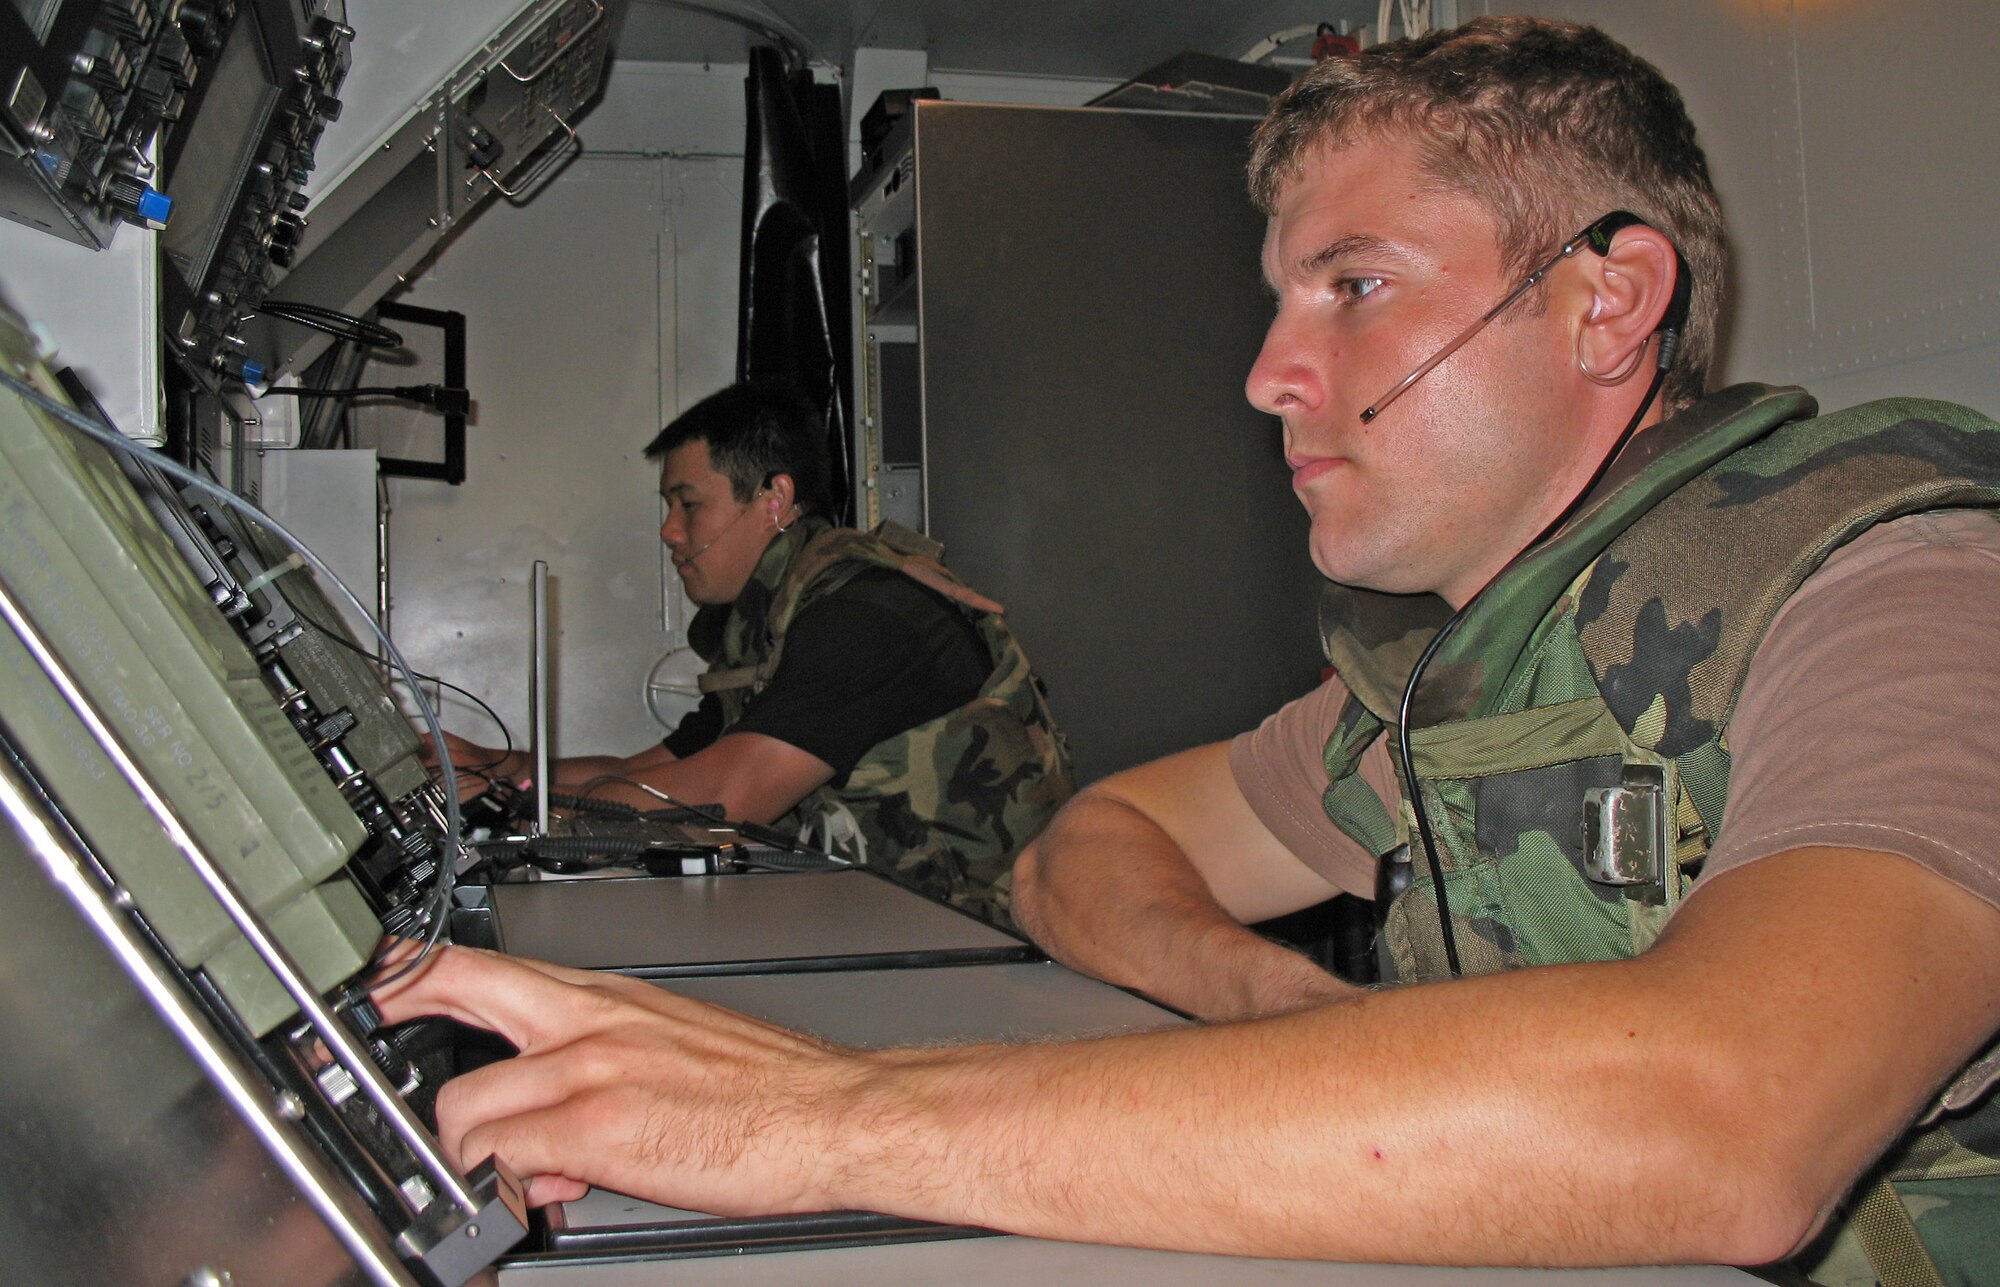 BARBER?S POINT, Hawaii -- Tech. Sgt. Daniel Keefe and Tech. Sgt. William Chang monitor RADAR screens during an exercise at Barber's Point, Hawaii, on 25 July, 2006.  Both Airmen are with the Hawaii Air National Guard's 297th Air Traffic Control Squadron. (US Air Force Photo by Tech. Sgt. Chris Vadnais)